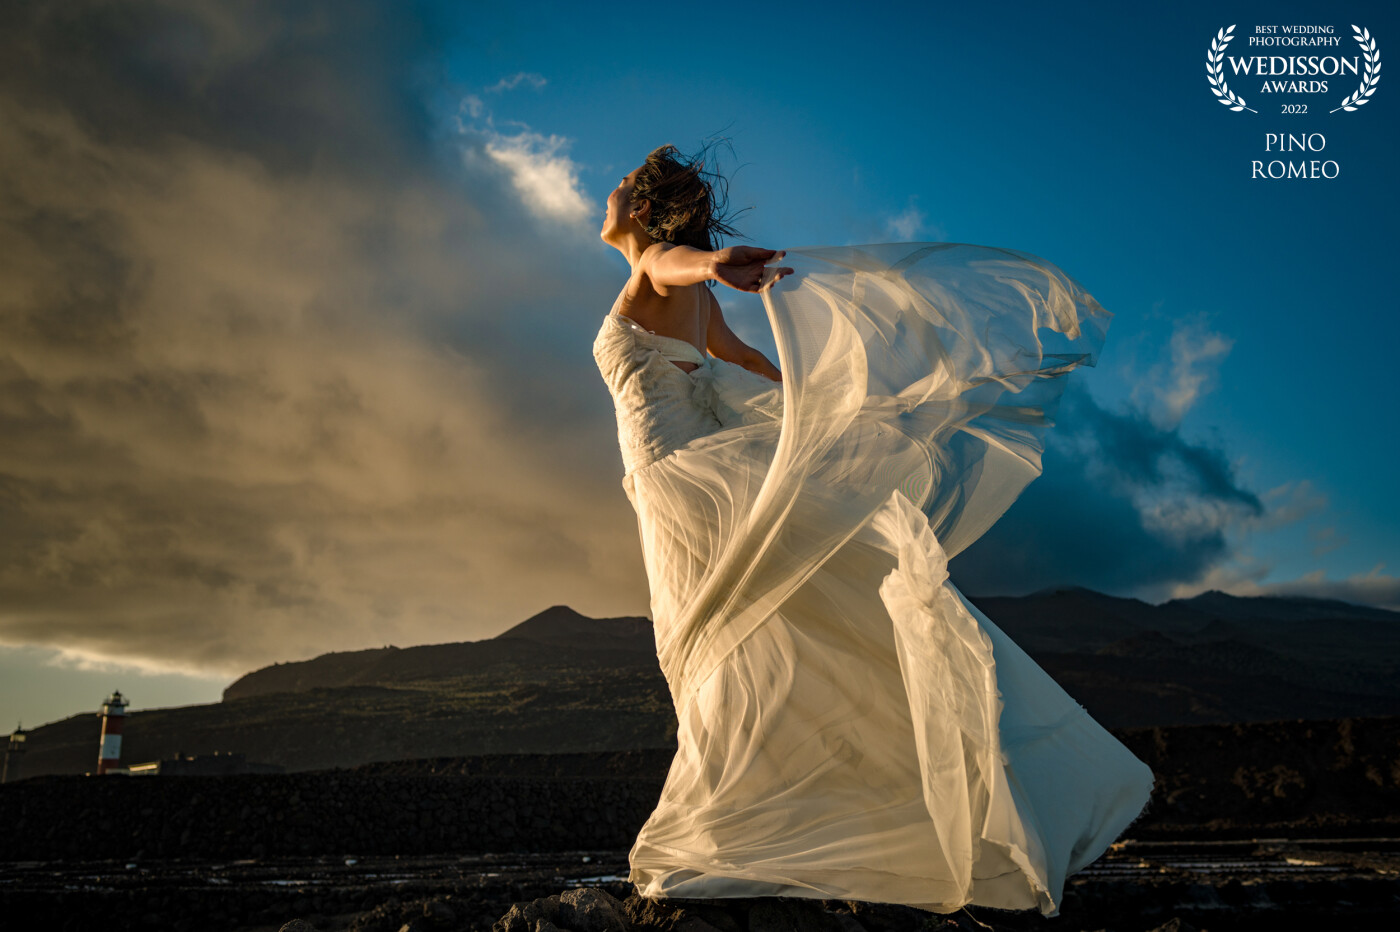 Joan, a young bride, faces the wind and the clouds.  On the island of La Palma in the Canary Islands, the entire south is made up of recent volcanoes and cooled volcanic lava.  The salt pans of Fuencaliente face the Atlantic Ocean, and the wind often blows strongly.   An ideal location for a post wedding portrait session.